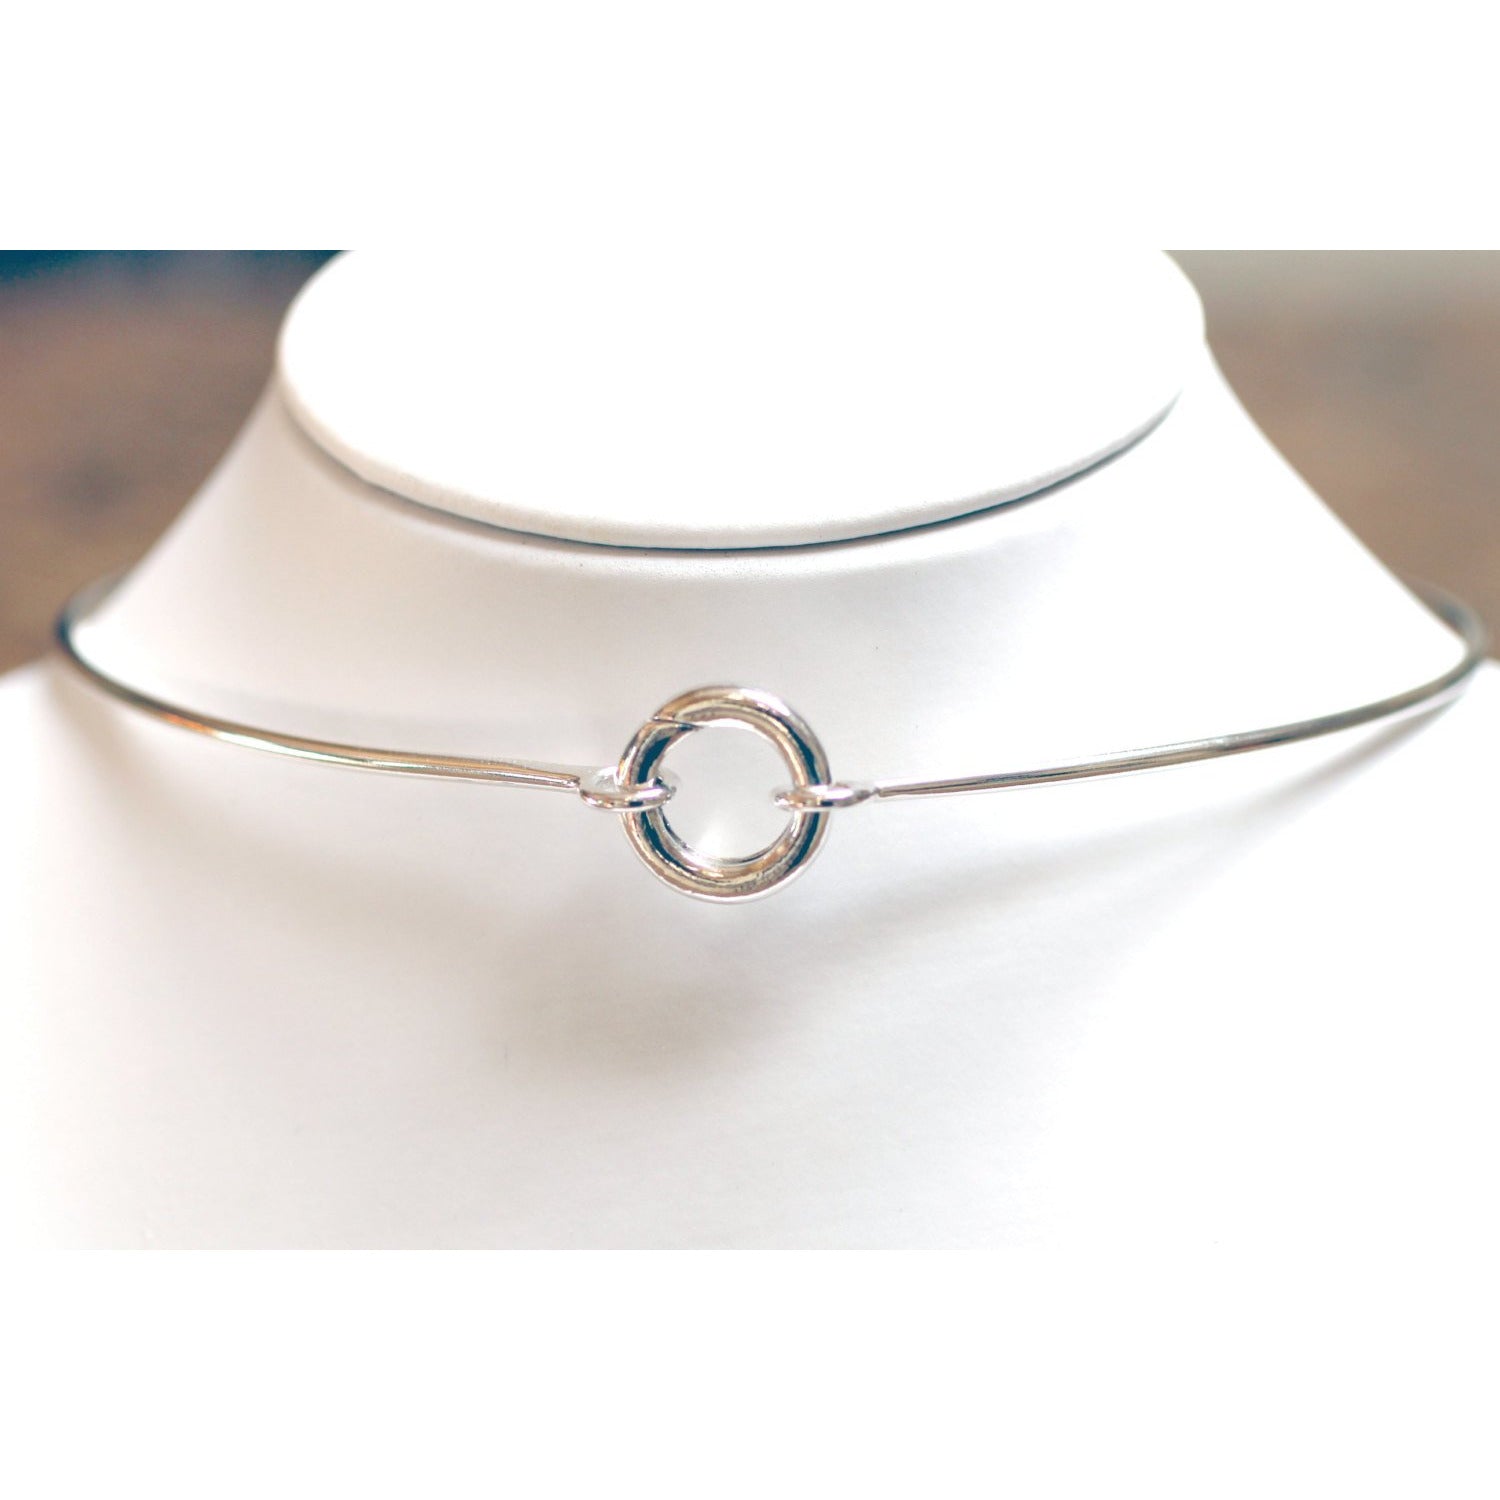 Solid Sterling Silver (925) BDSM Day Collar Necklace with Discreet, Concealed 3 mm Thick, 15 mm Wide Spring Ring Clasp